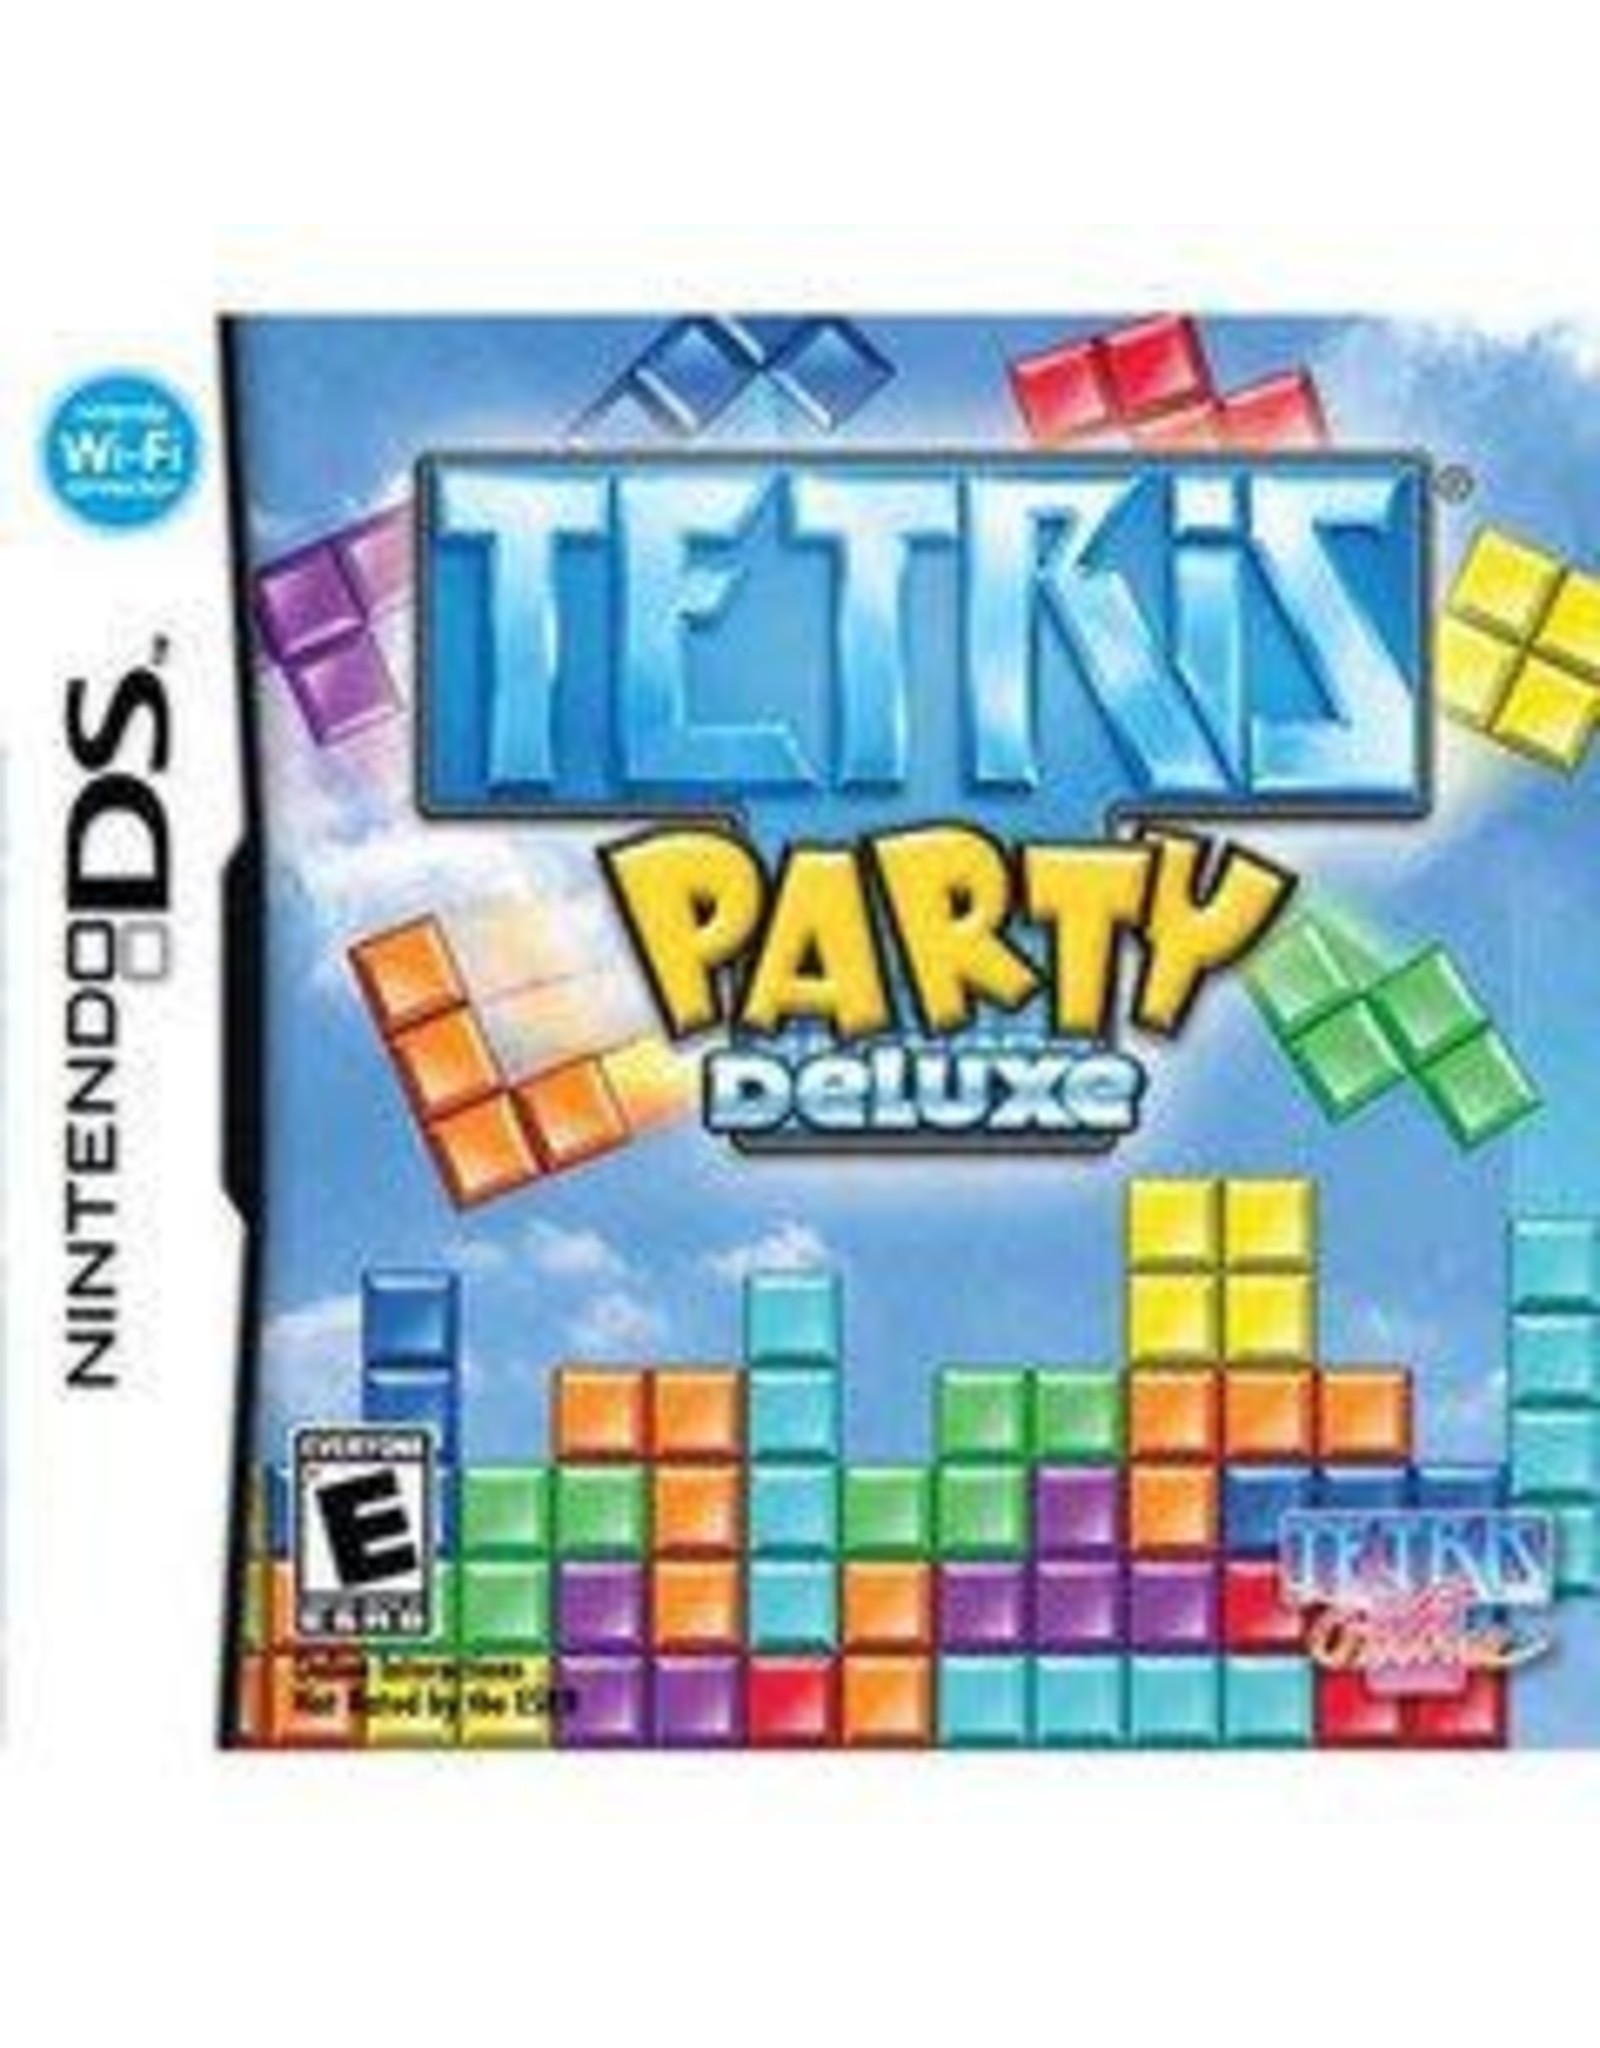 Nintendo DS Tetris Party Deluxe (Cart Only)